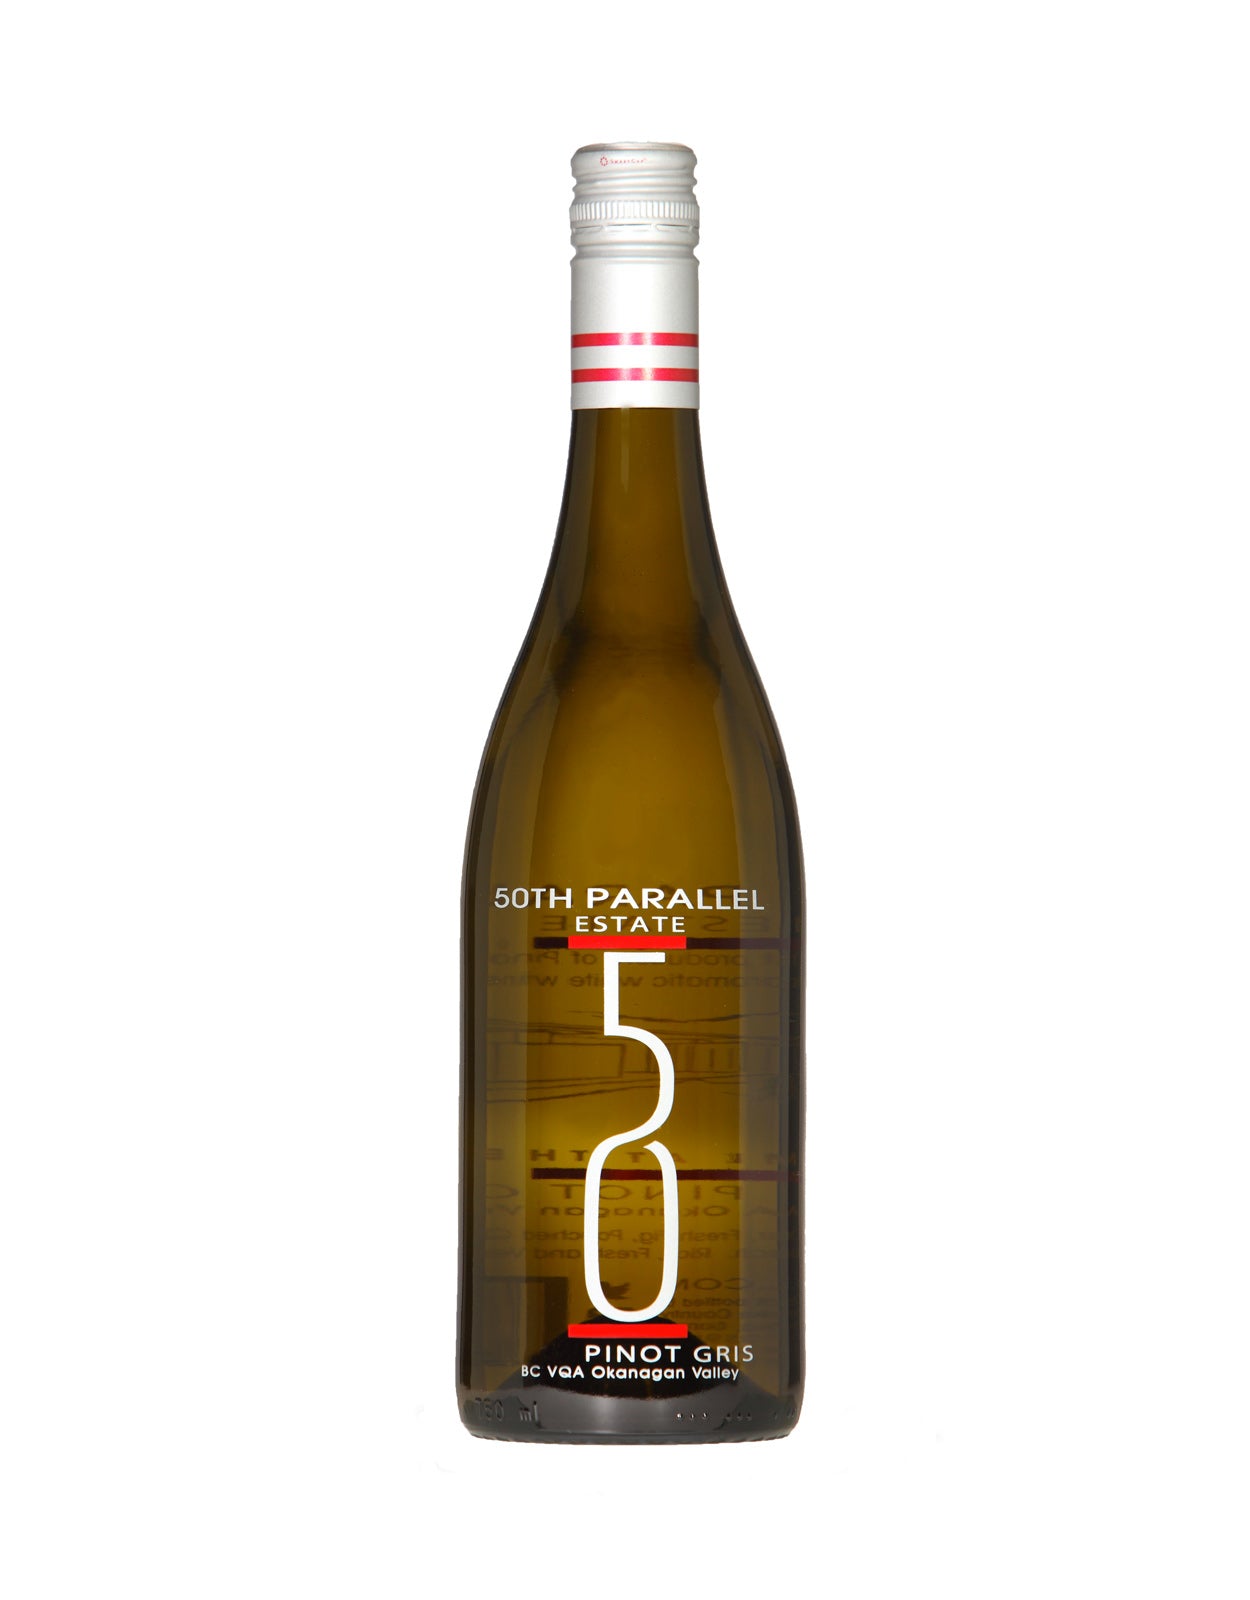 50th Parallel Pinot Gris 2021